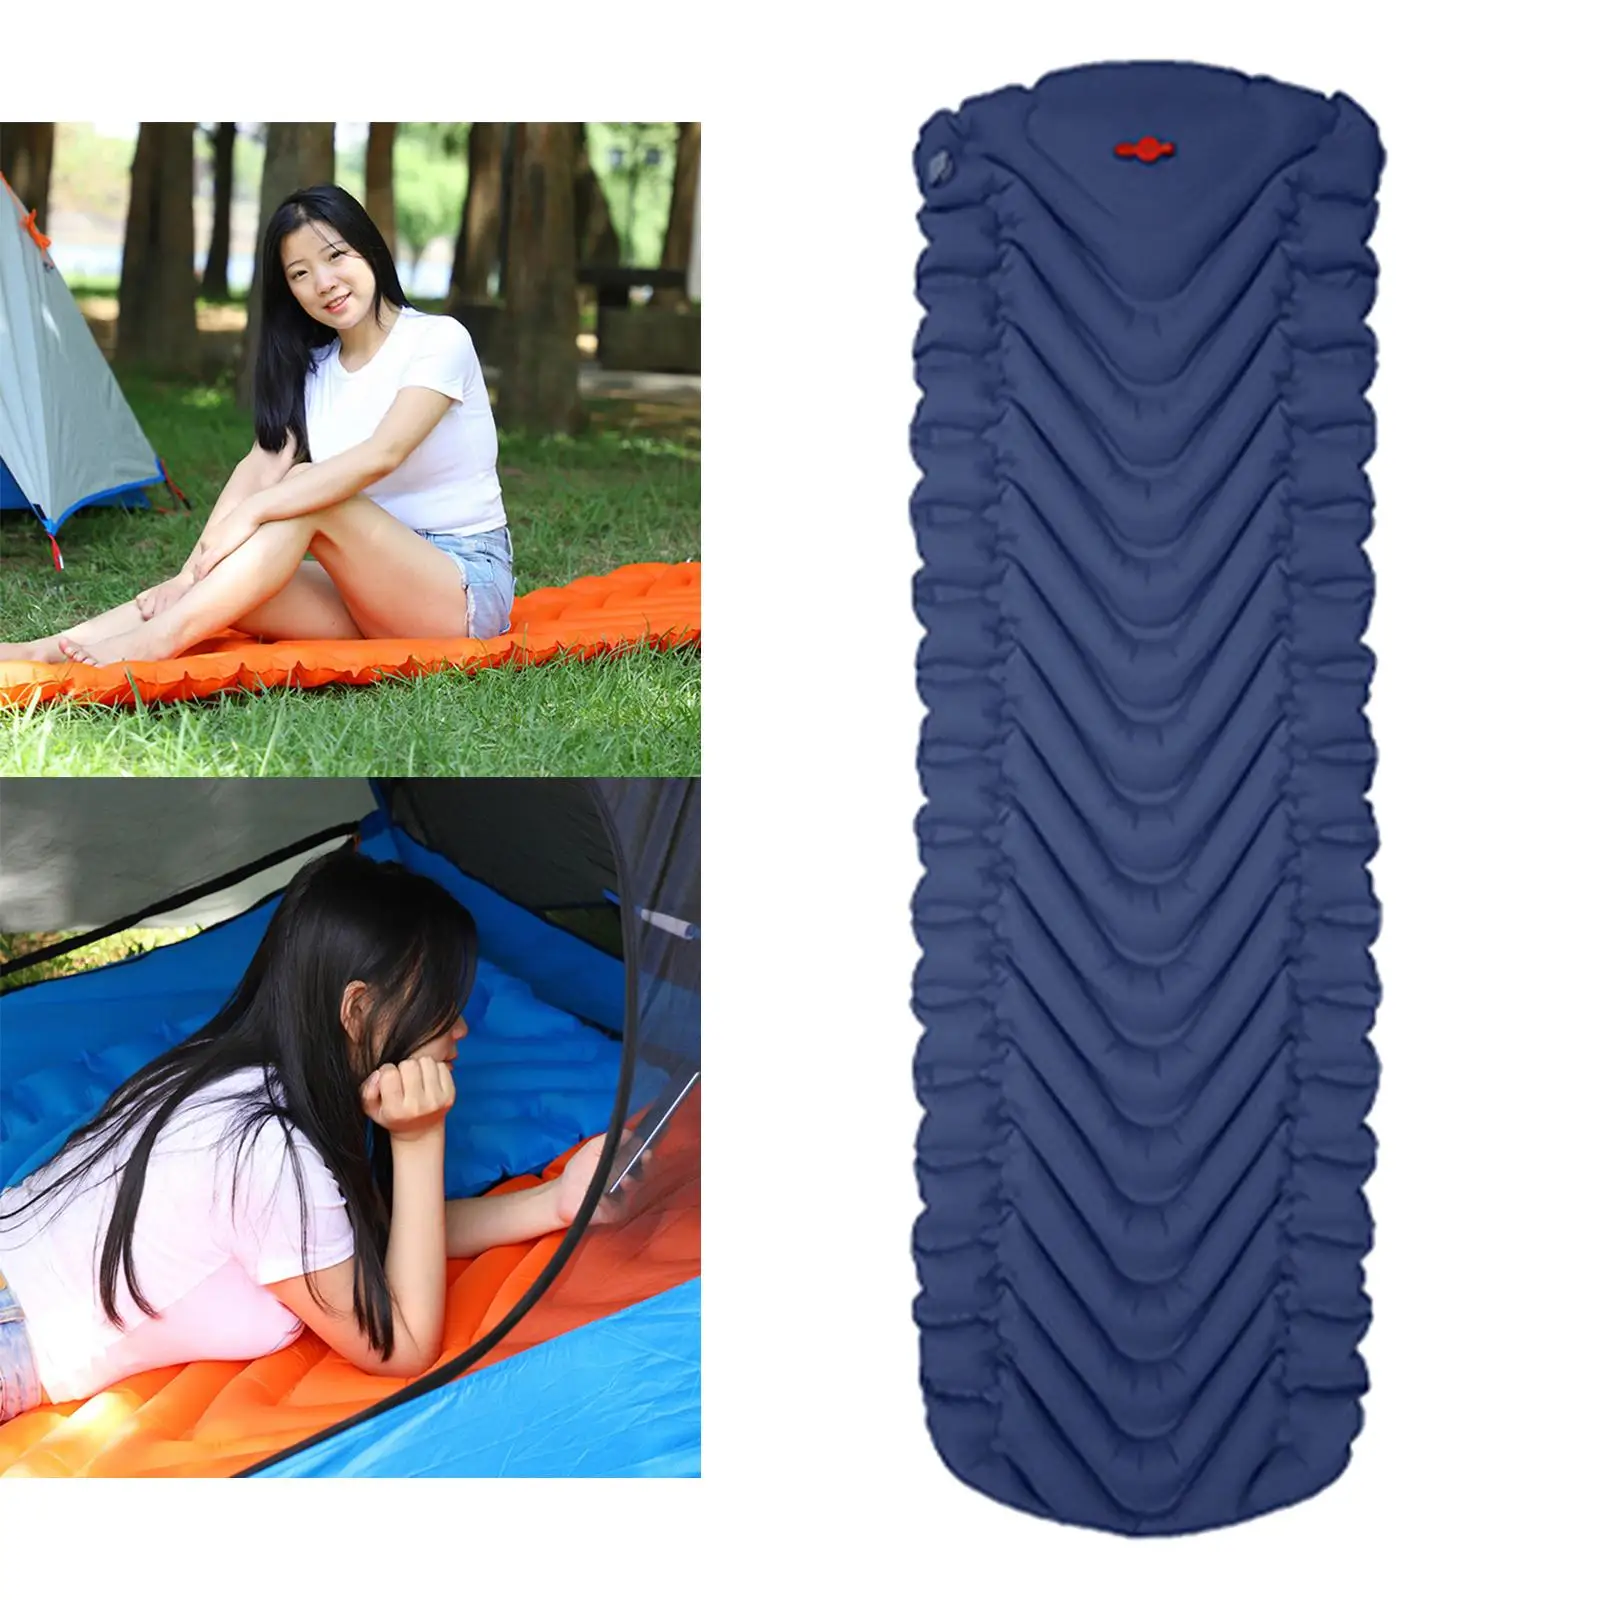 Inflatable Sleeping Pad with Built-in Pump, Most Comfortable Camping Mattress for Backpacking, Car Traveling and Hiking Air Bed